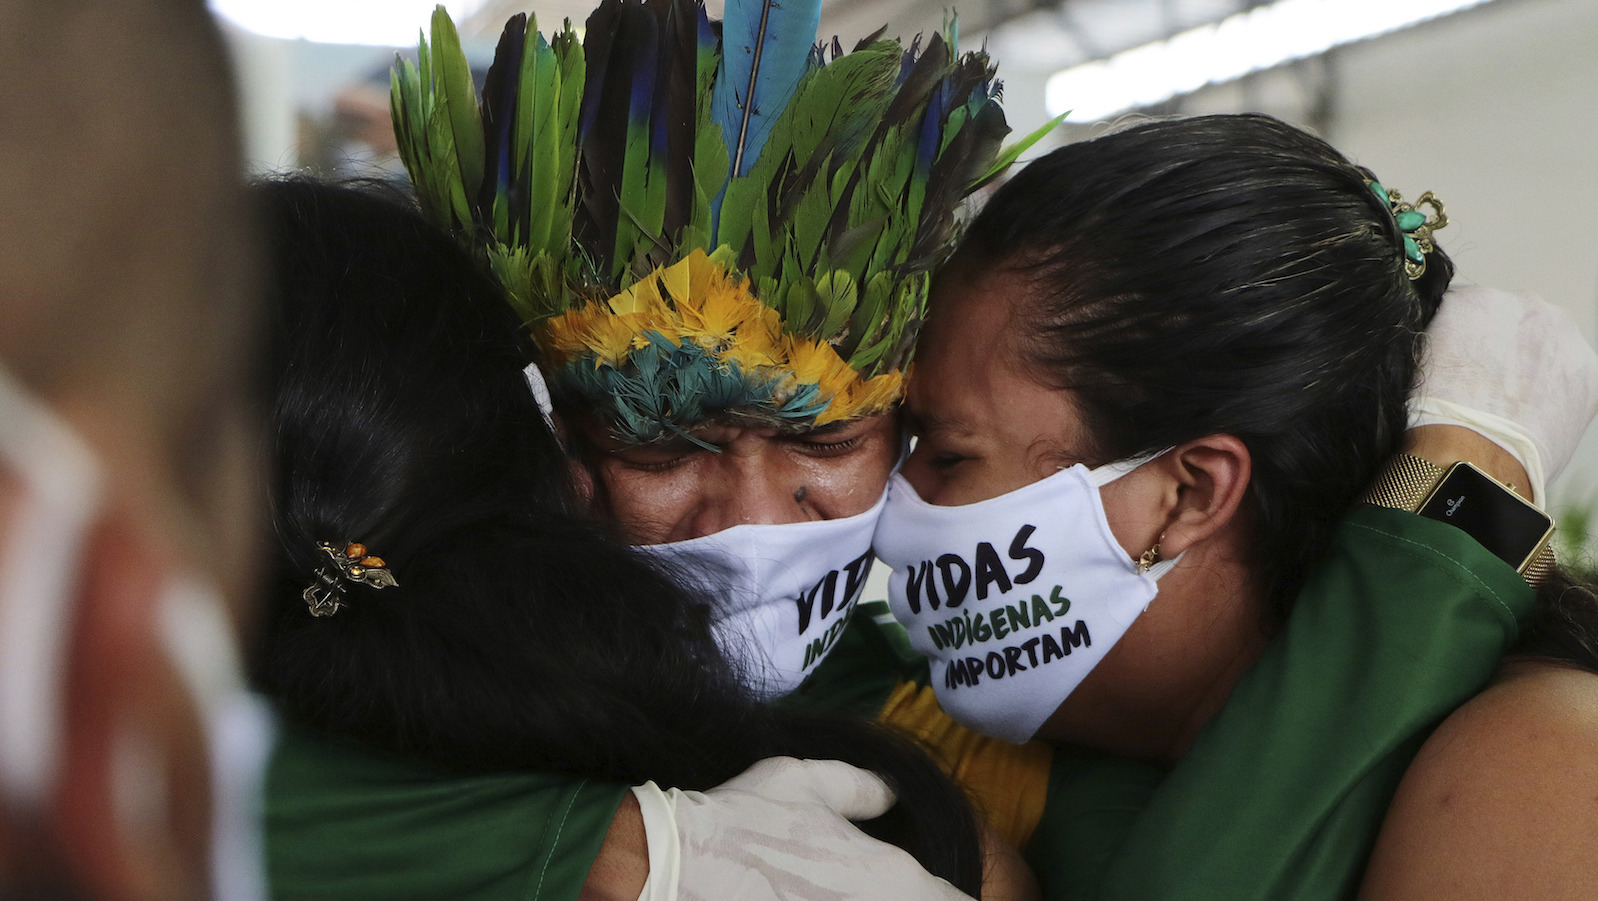 Relatives cry during the funeral of Kokama Chief Messias Martins Moreira, who died of COVID-19